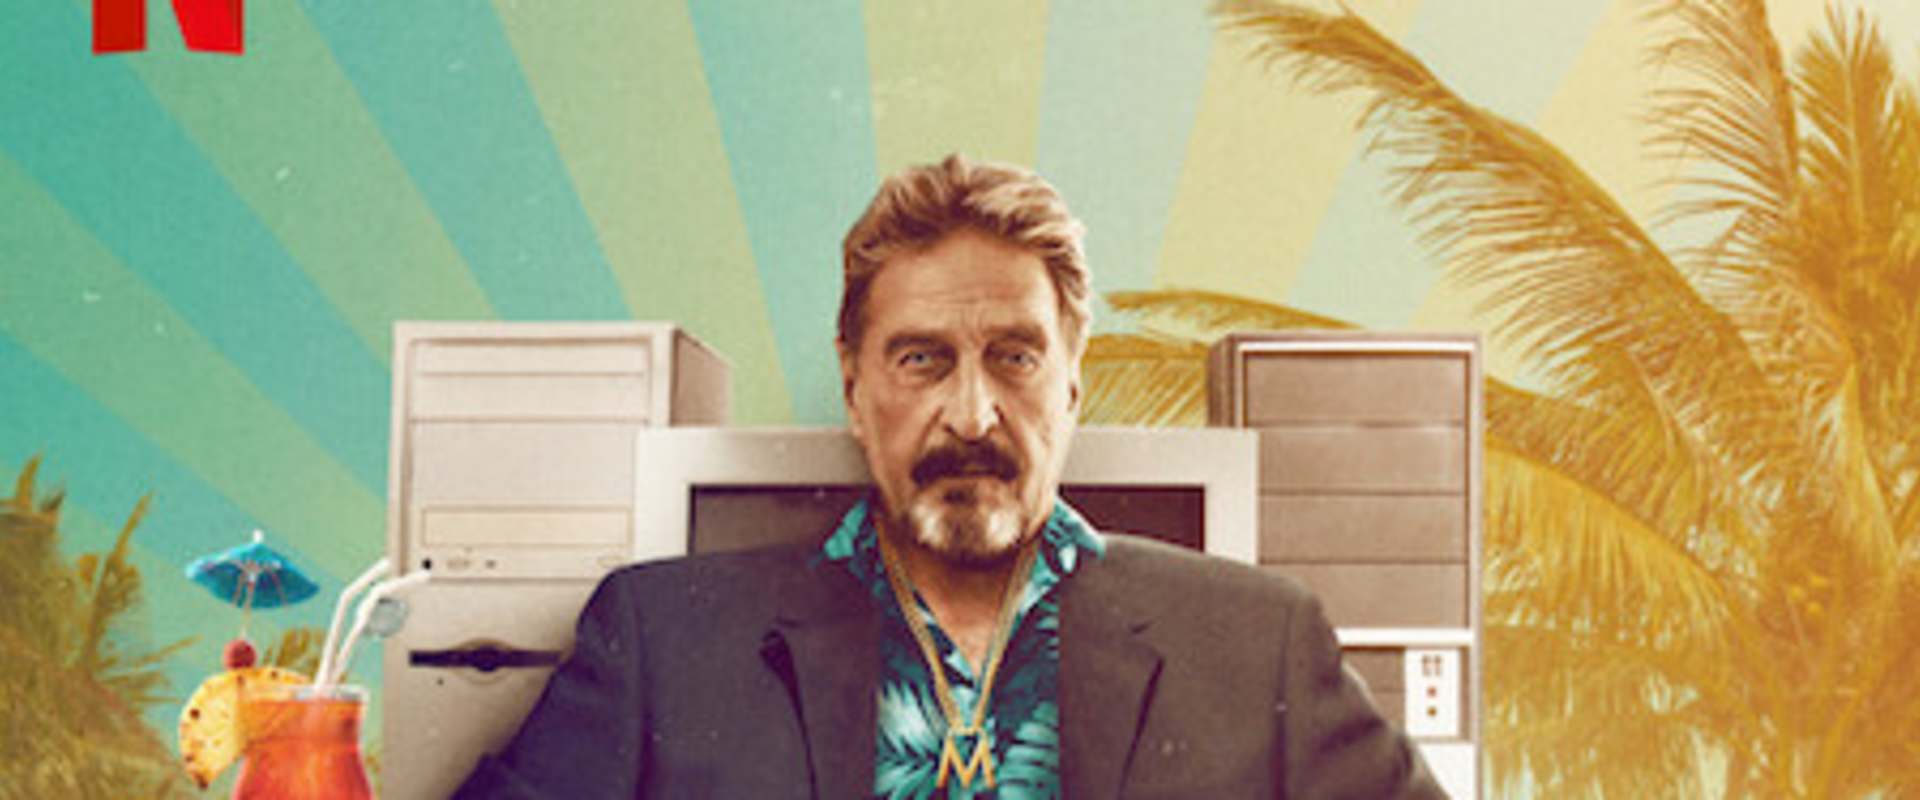 Running with the Devil: The Wild World of John McAfee background 2